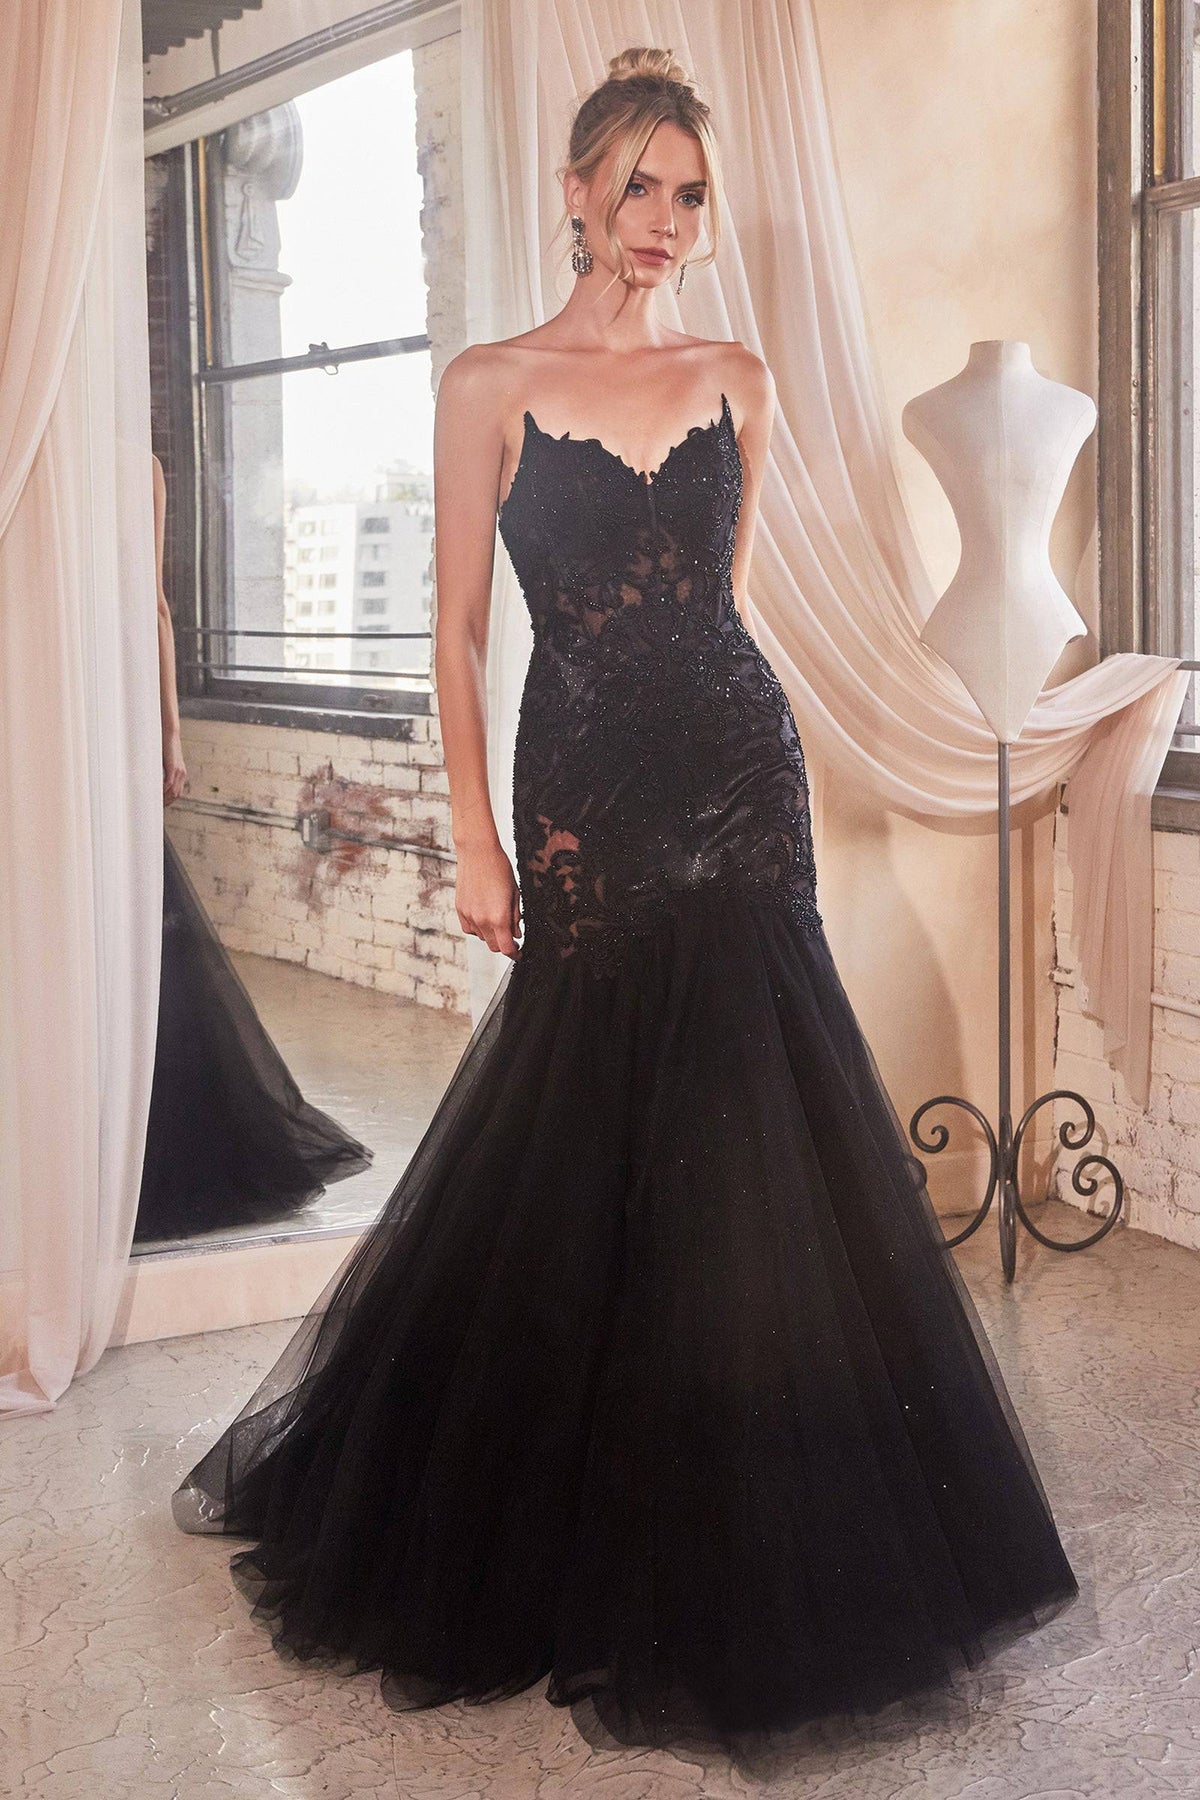 CD C148 - Lace & Tulle A-Line Prom Gown with Sheer Corset Bodice